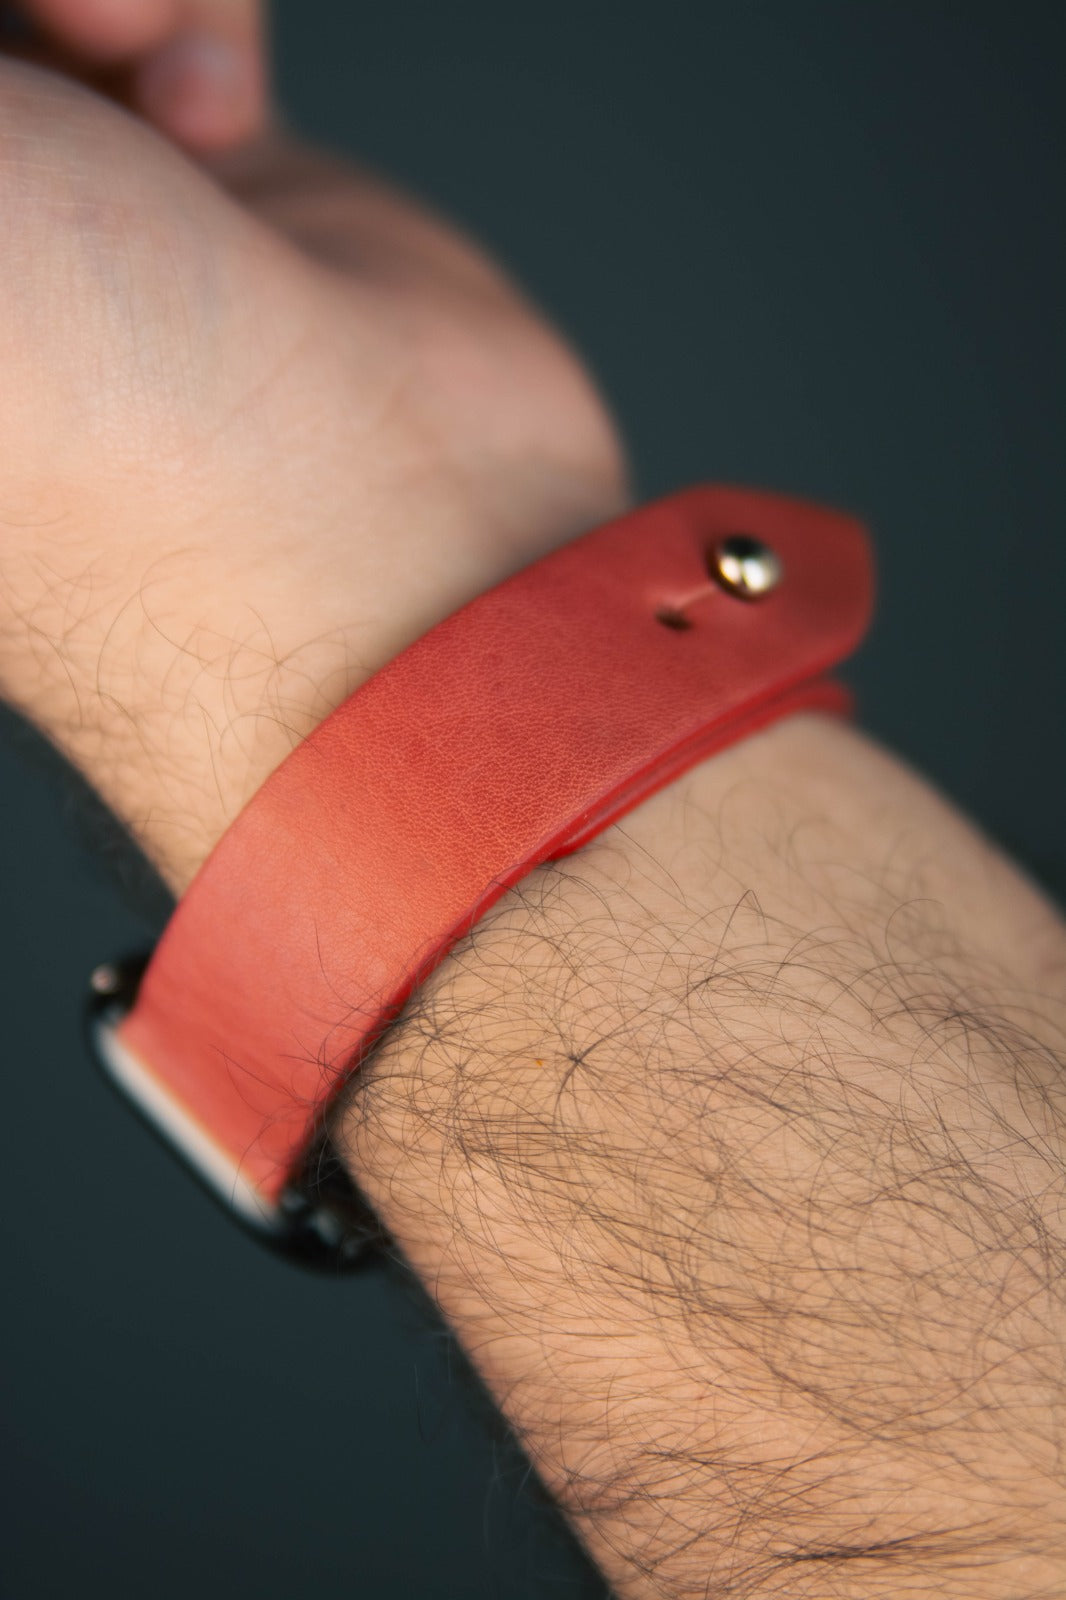 Salmon Red Apple Watch Strap - Pure Leather Strap